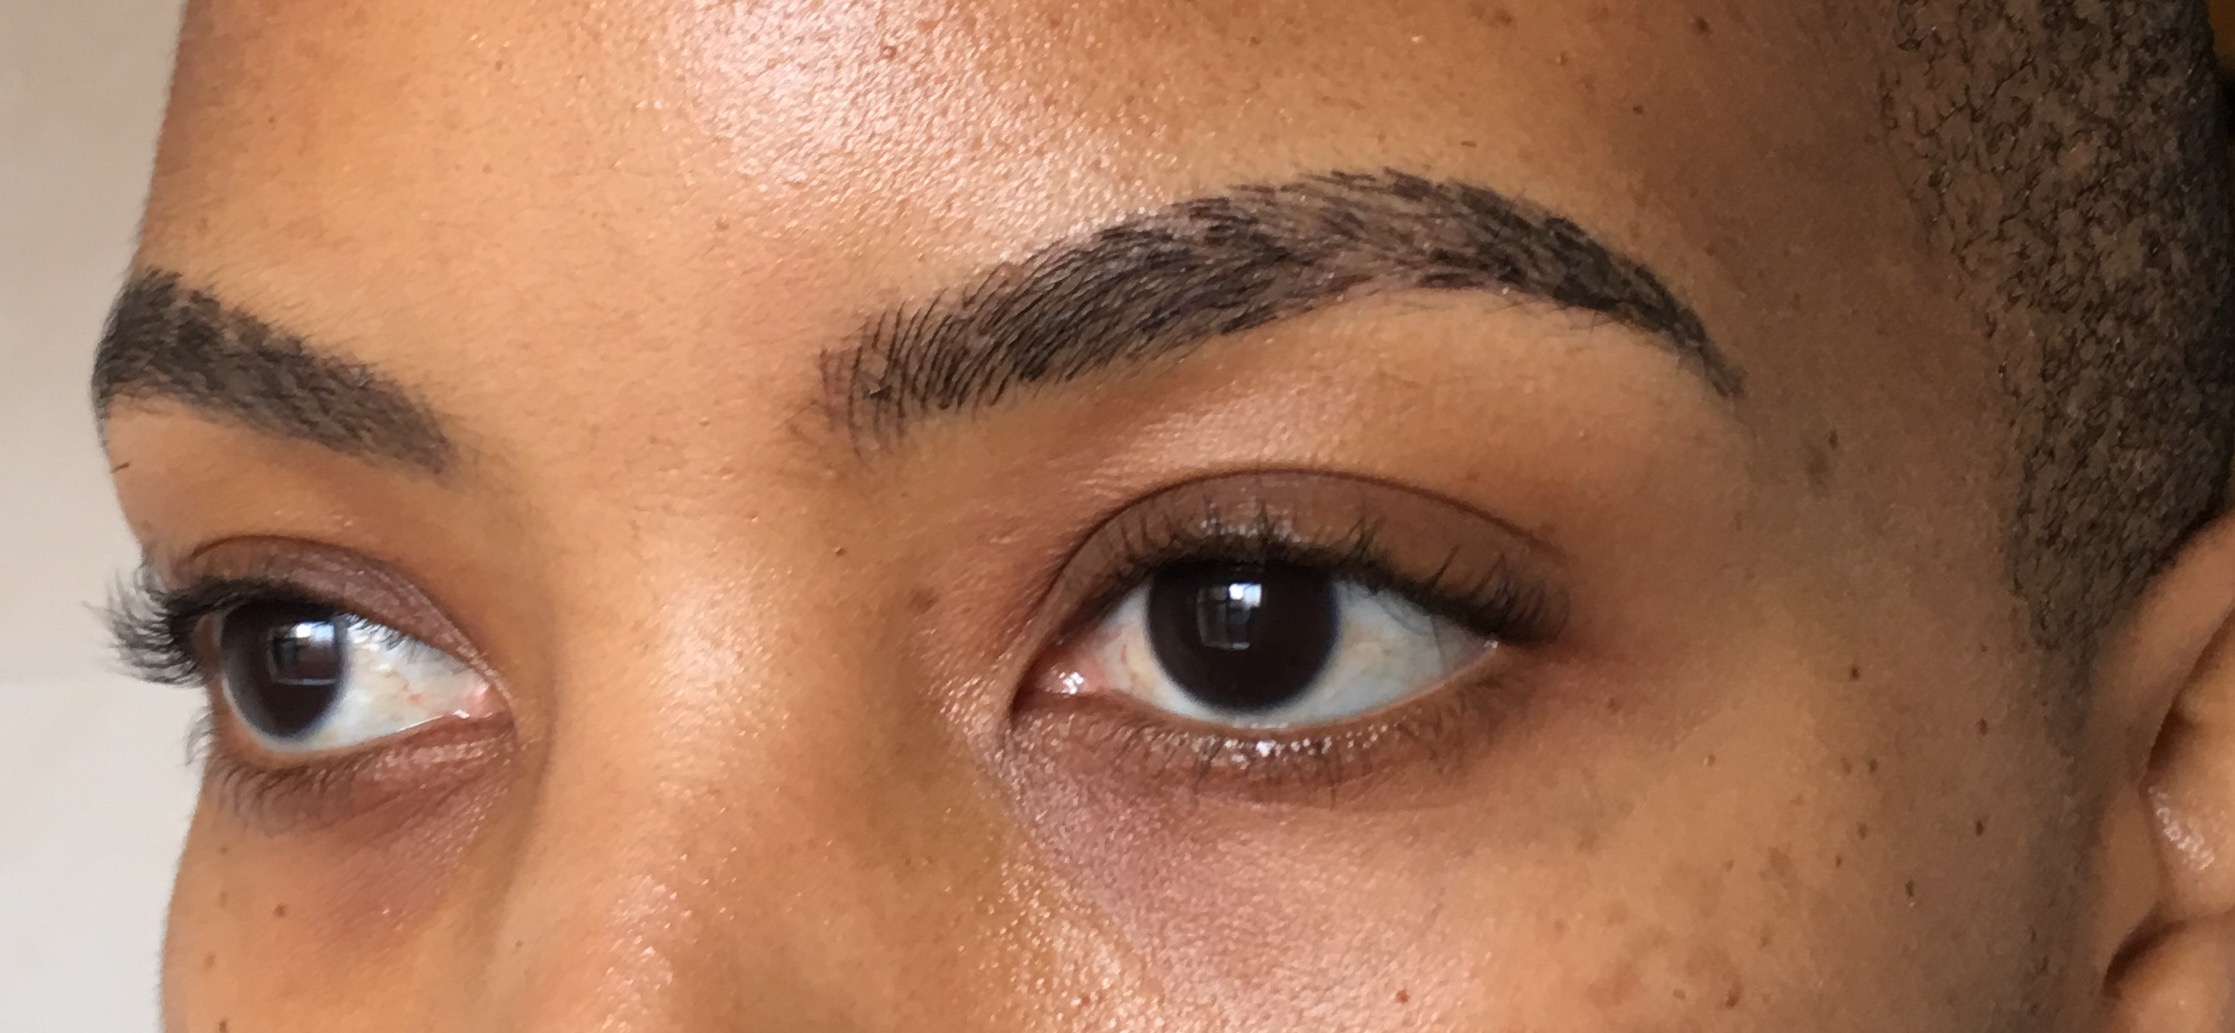 13StagesOfHealingMicroblading